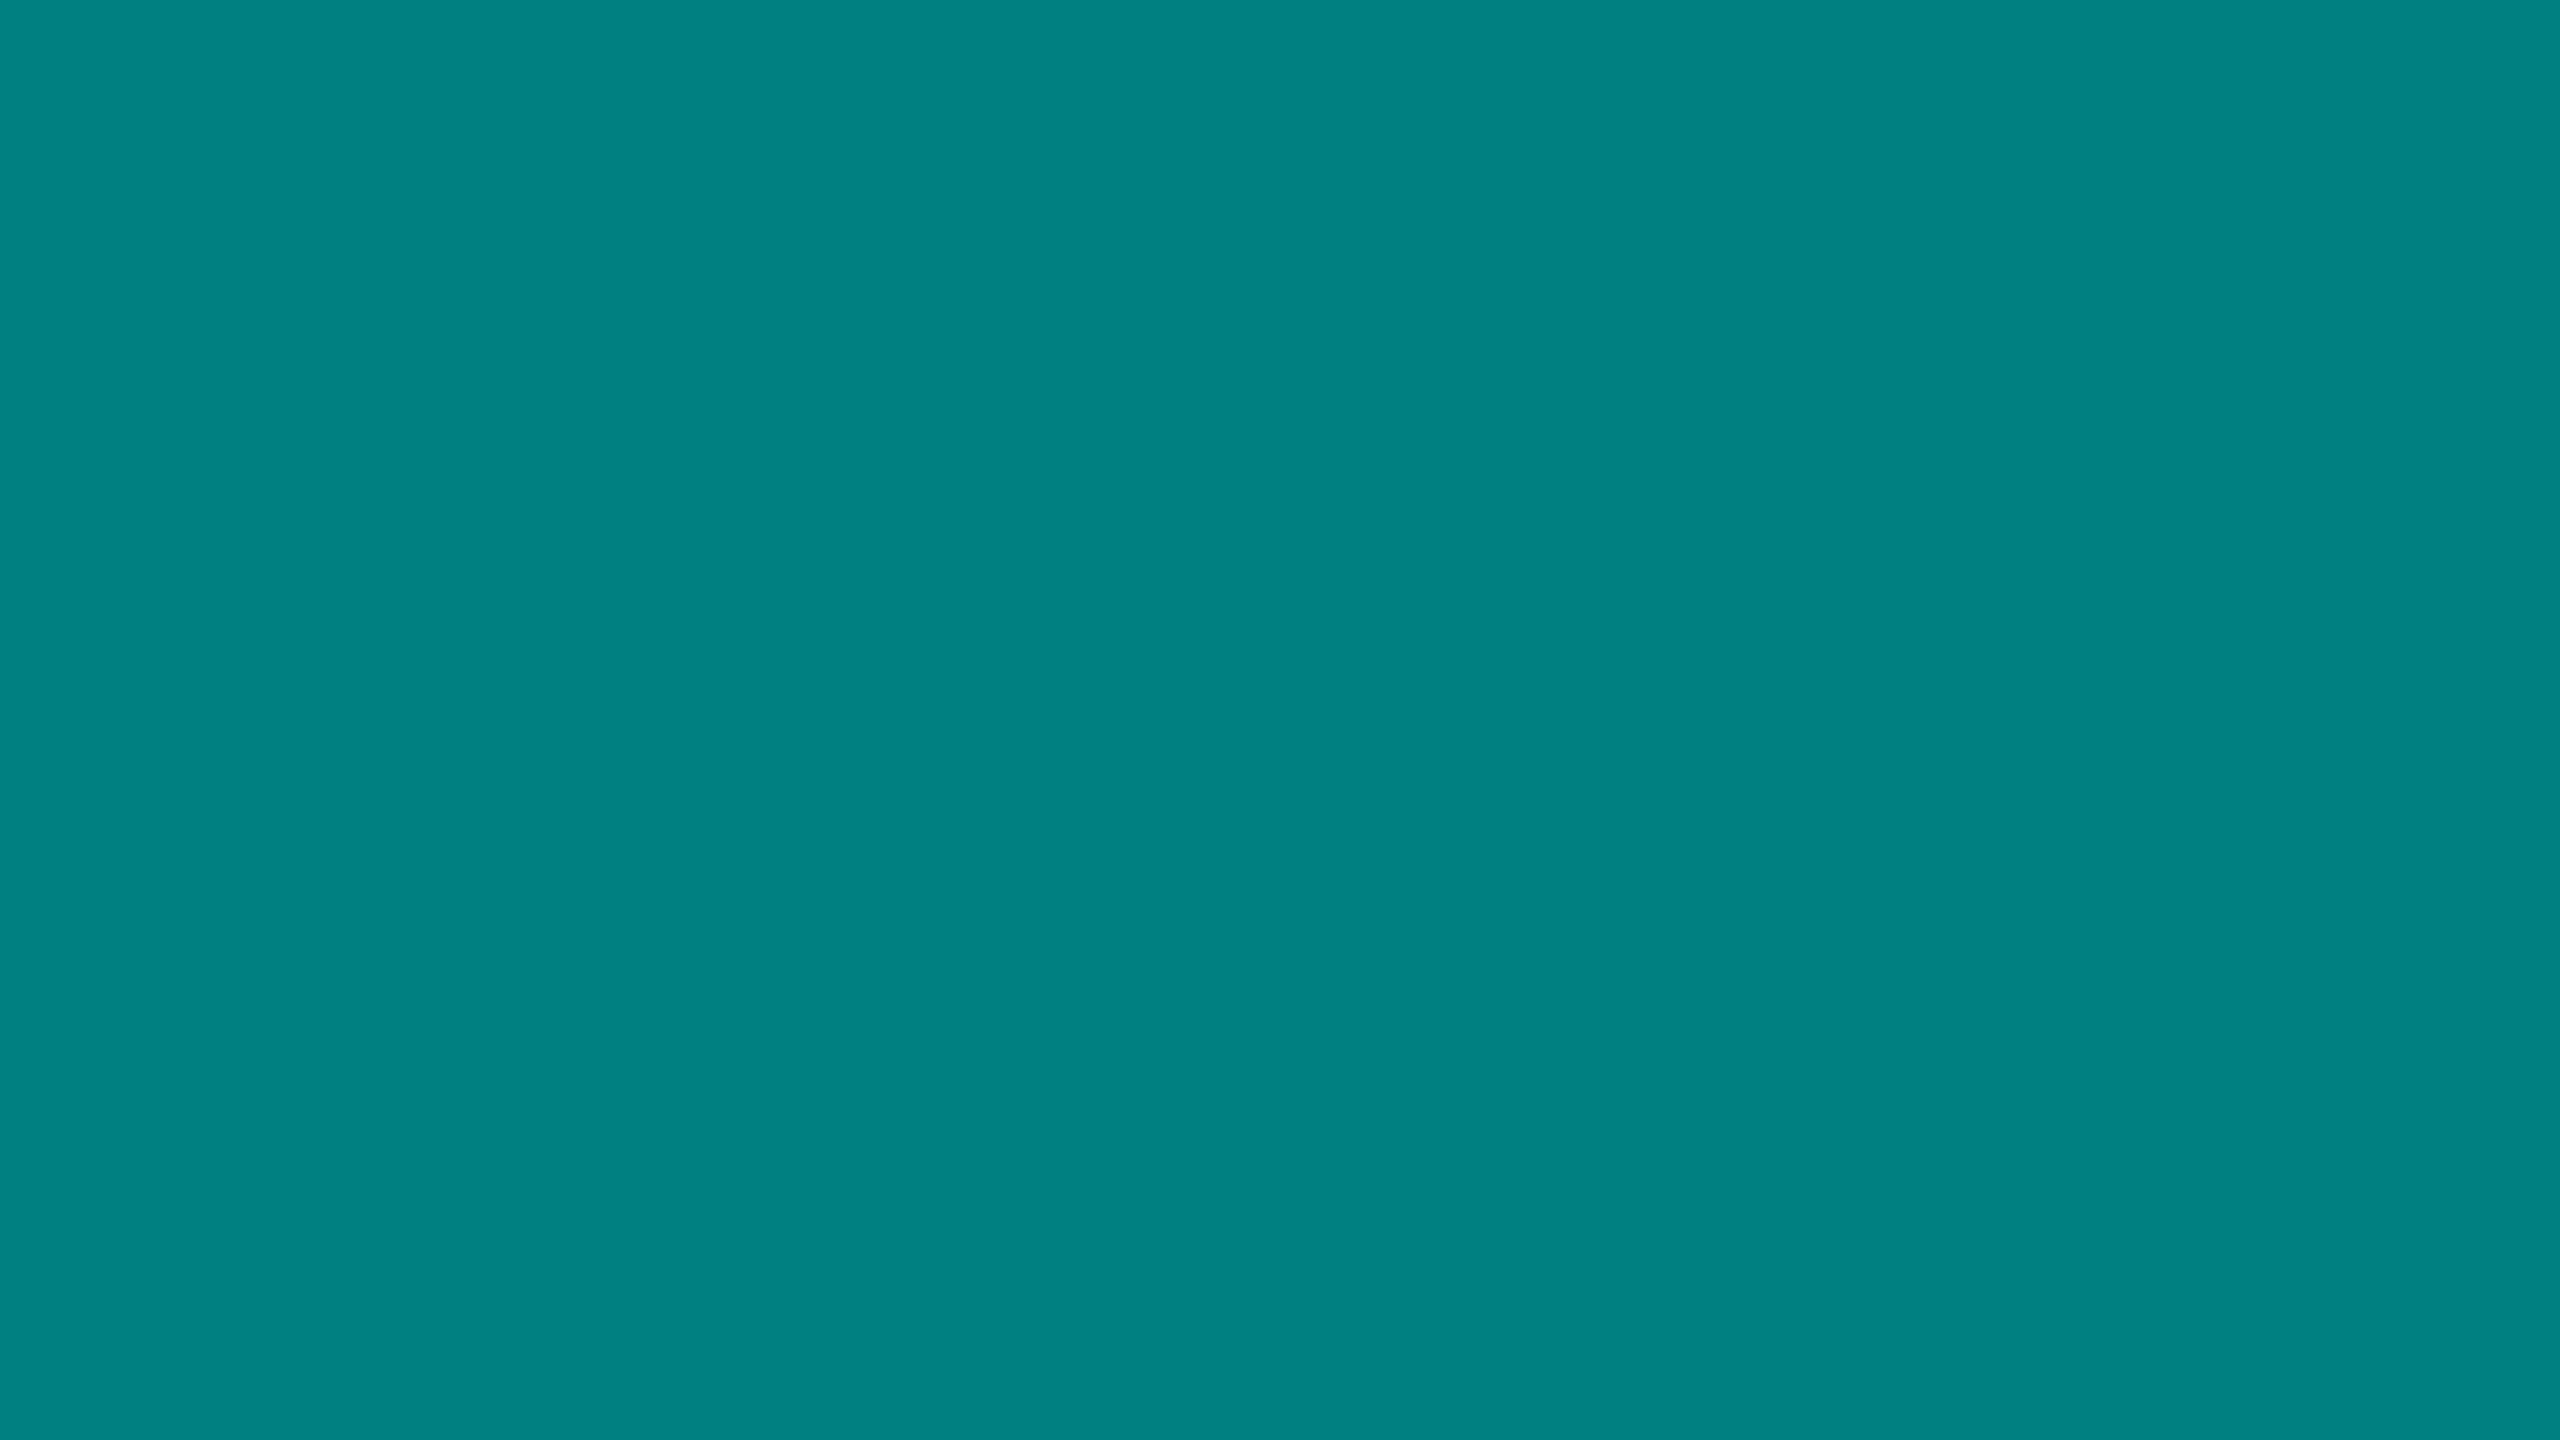 Sheenaowens: The Color Teal